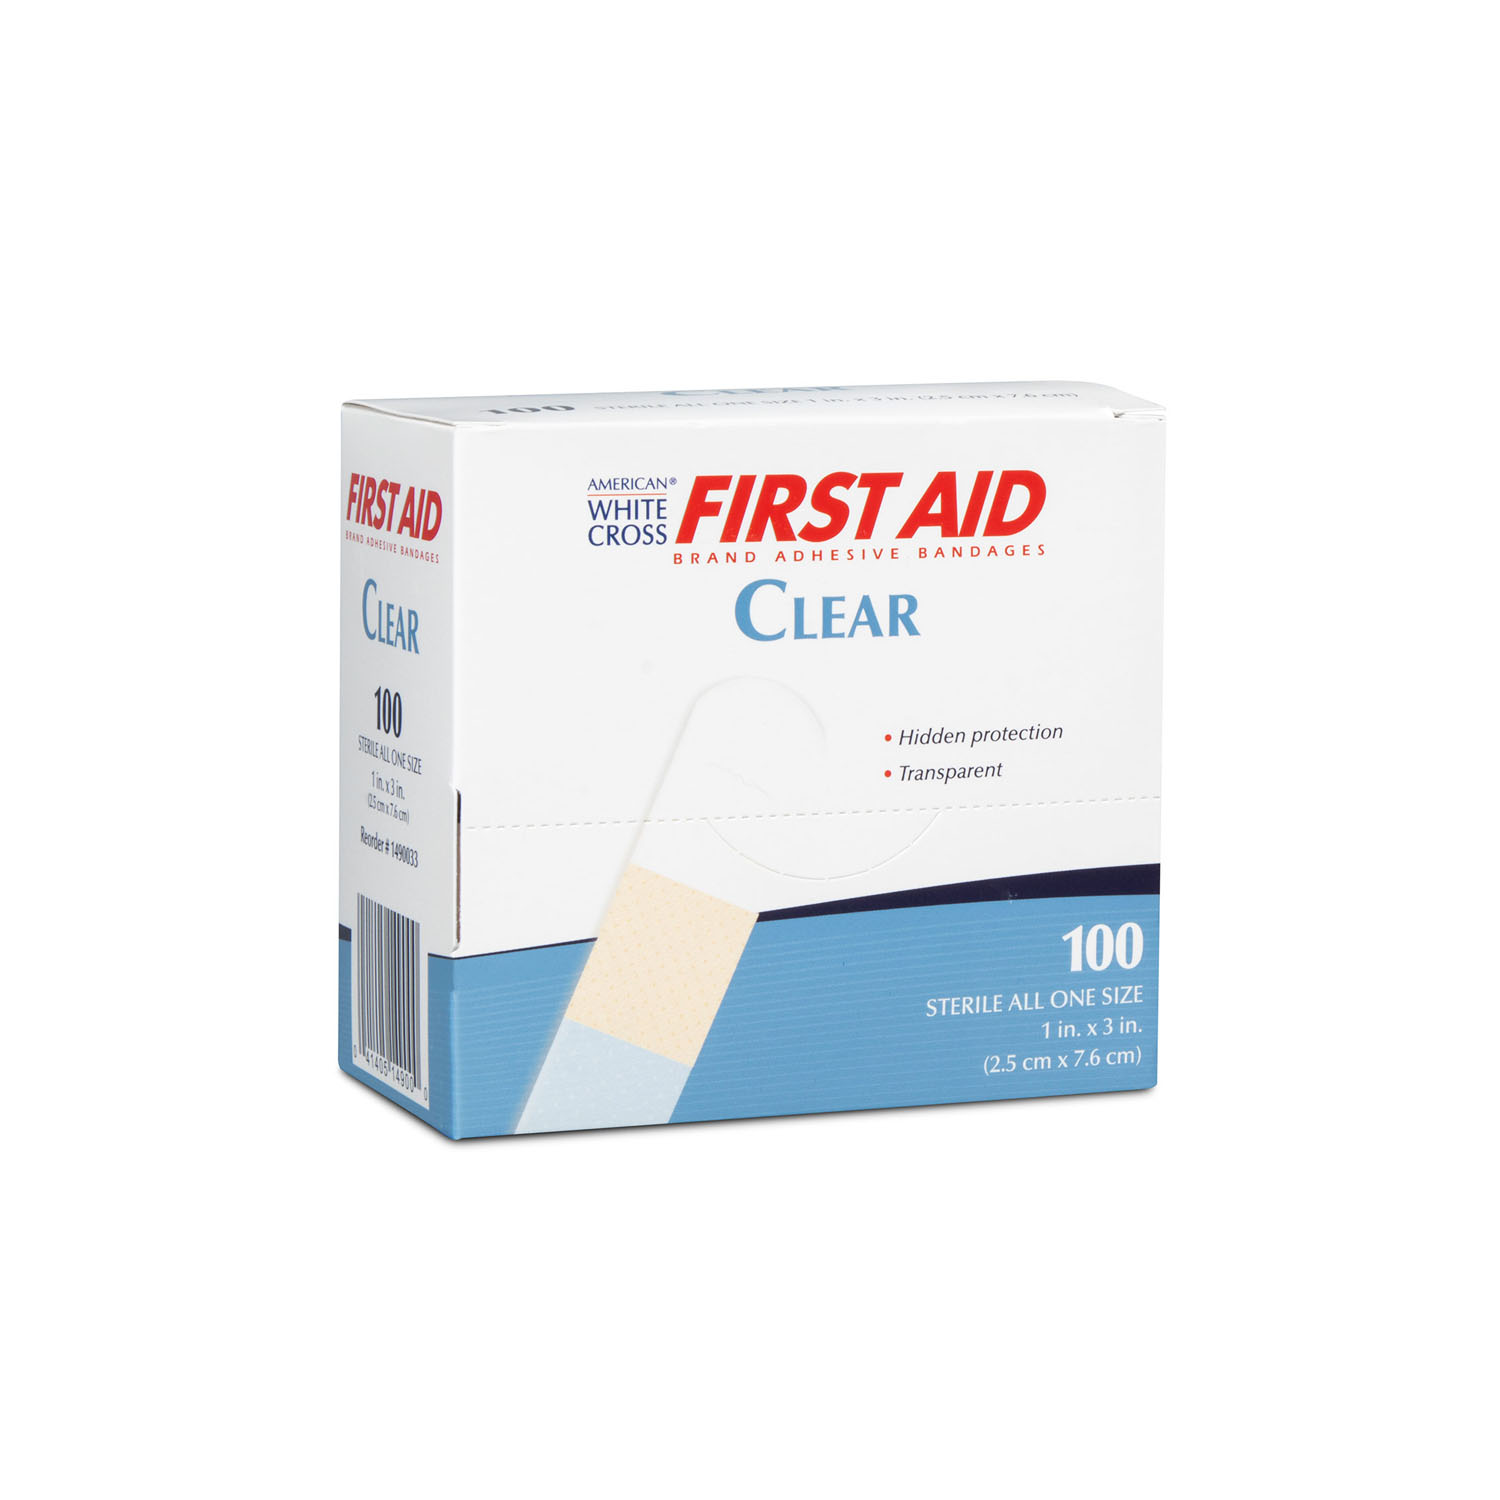 DUKAL FIRST AID ADHESIVE BANDAGES : 1490033 BX $2.84 Stocked